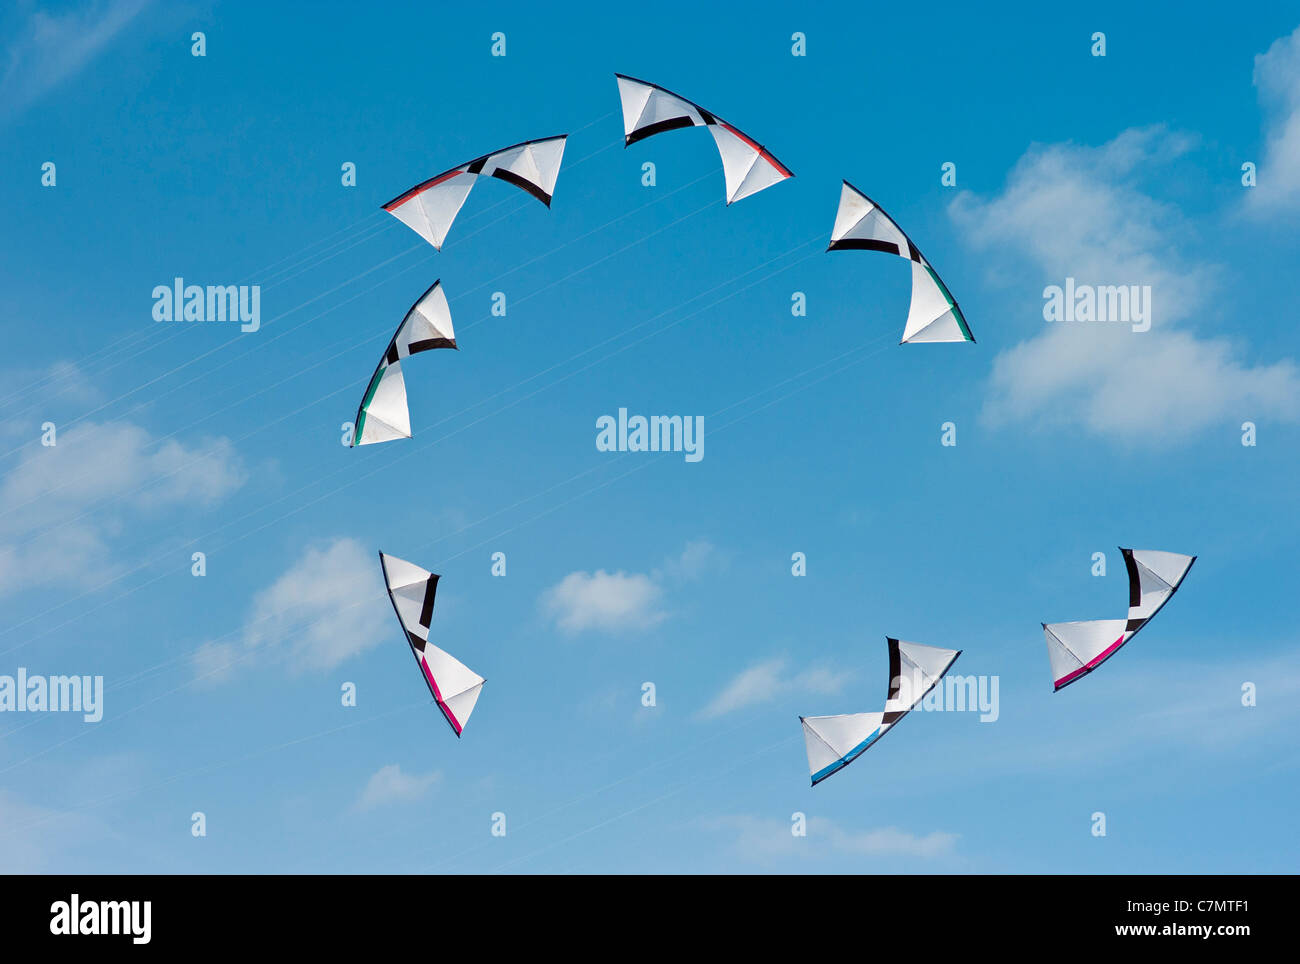 Precision or Formation Kite Flying by a group of People, Teamwork. Stock Photo